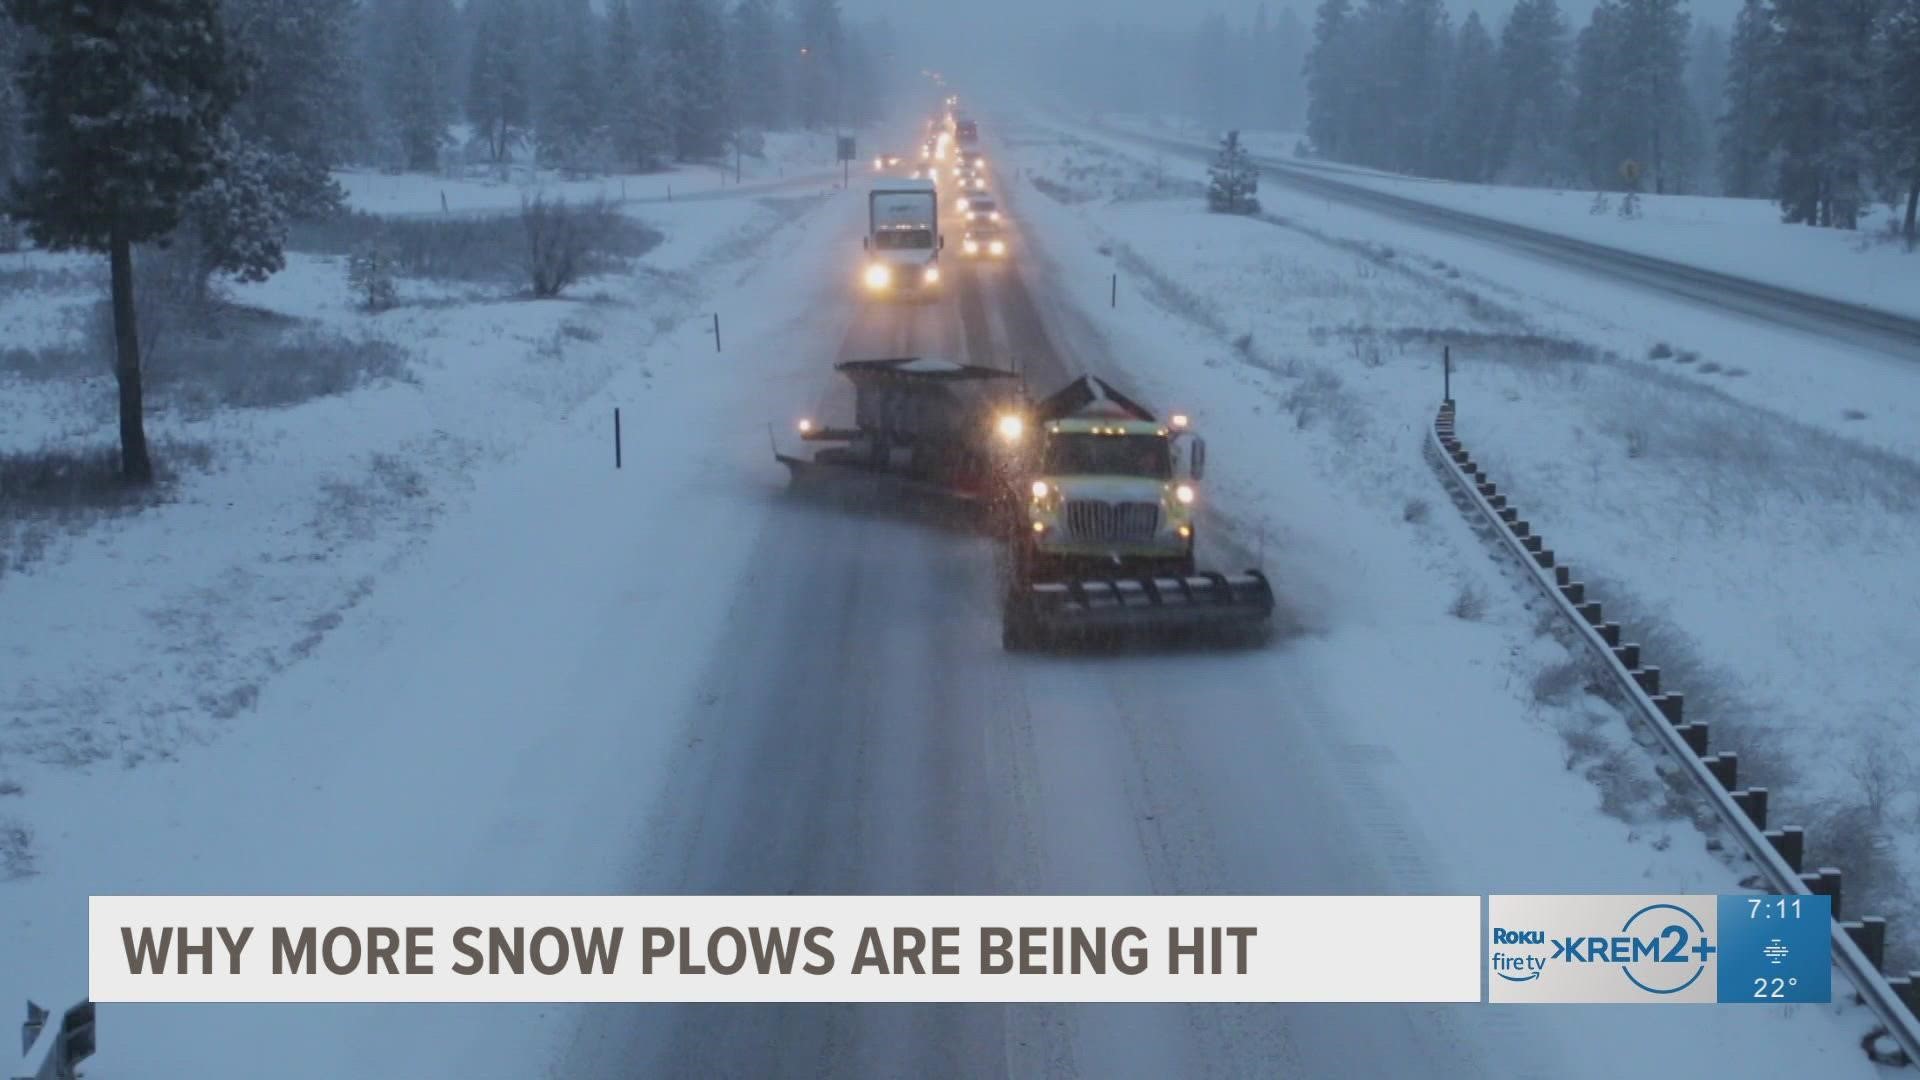 15 snowplows have been hit in the past three years and WSDOT said the numbers continue to rise.